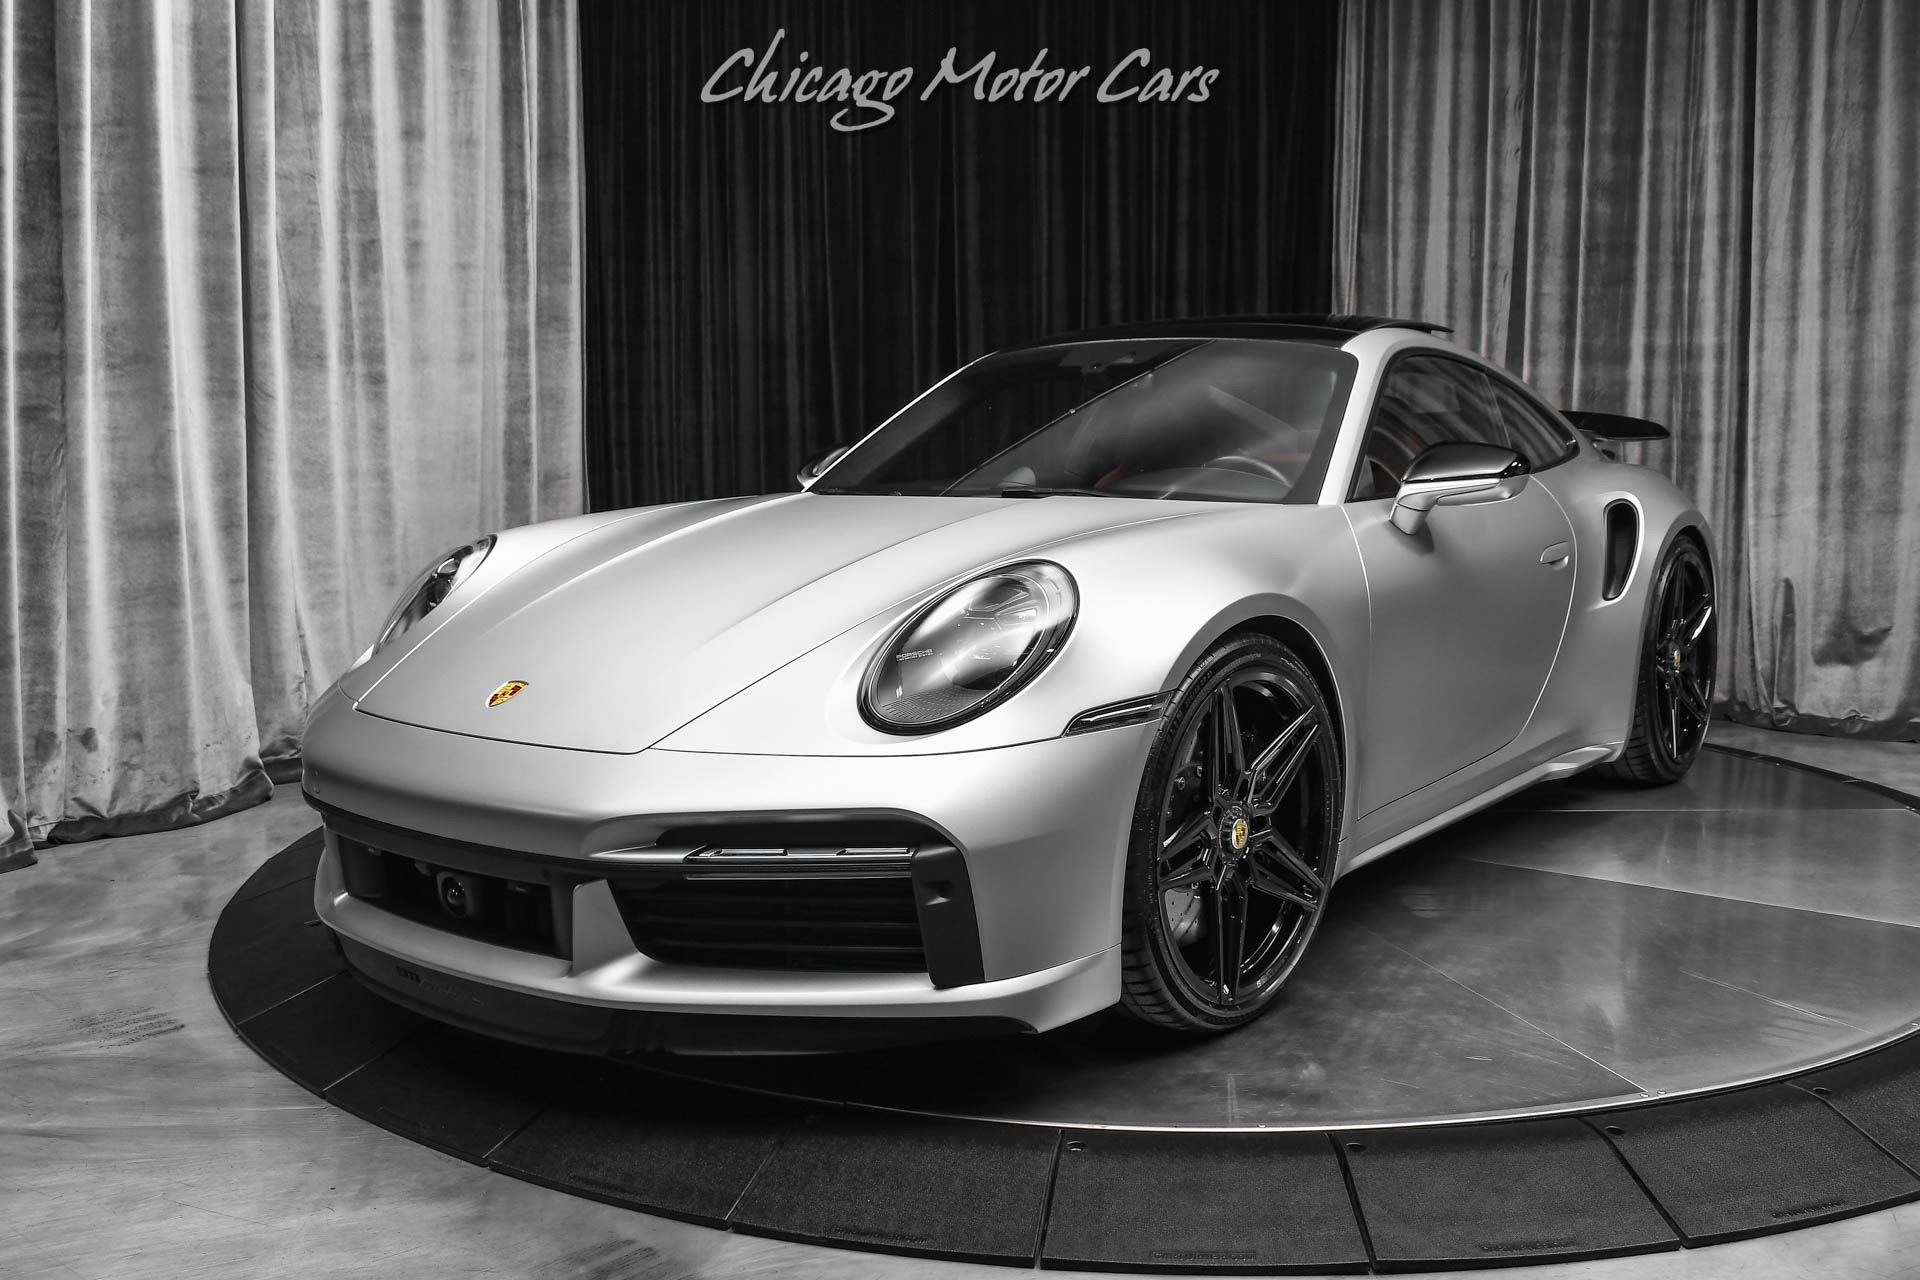 Used-2021-Porsche-911-Turbo-S-Coupe-992-GEN-PASM-SPORT-SUSPENSION-LIFT-SYSTEM-SPORT-EXHAUST-LOADED